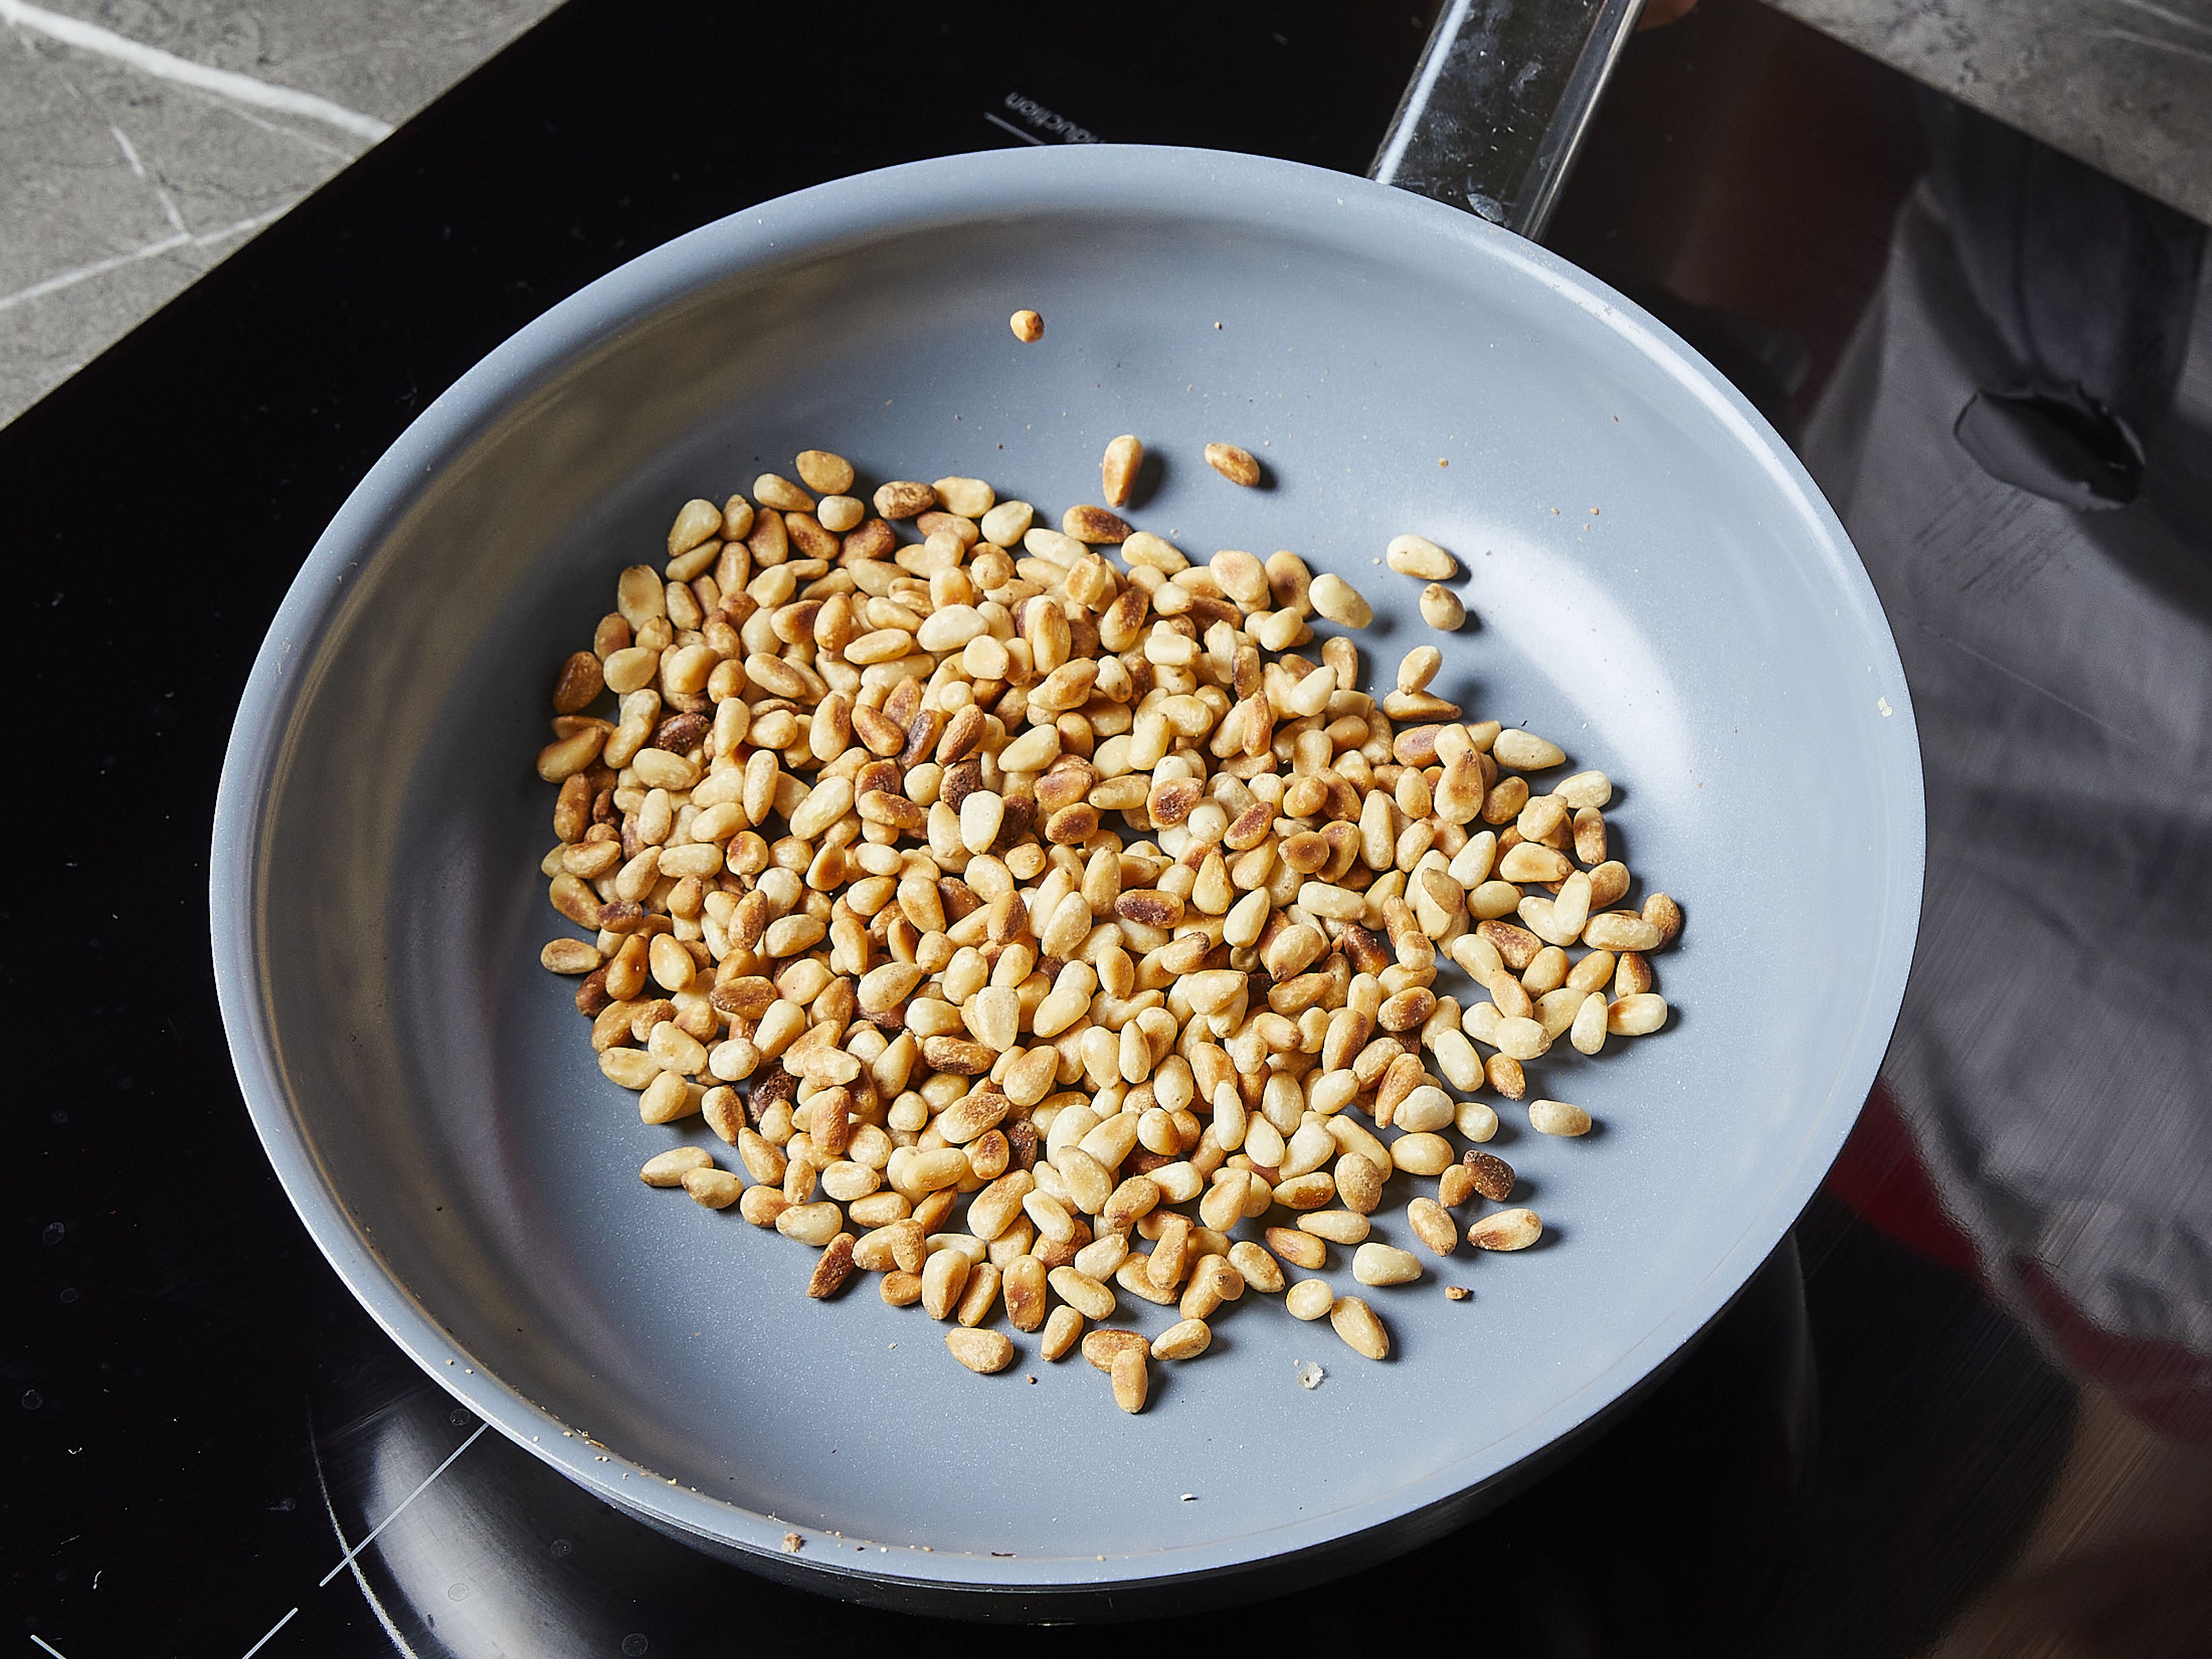 Toast pine nuts in a small frying pan for approx. 3–4 min. on medium-low heat until browned.